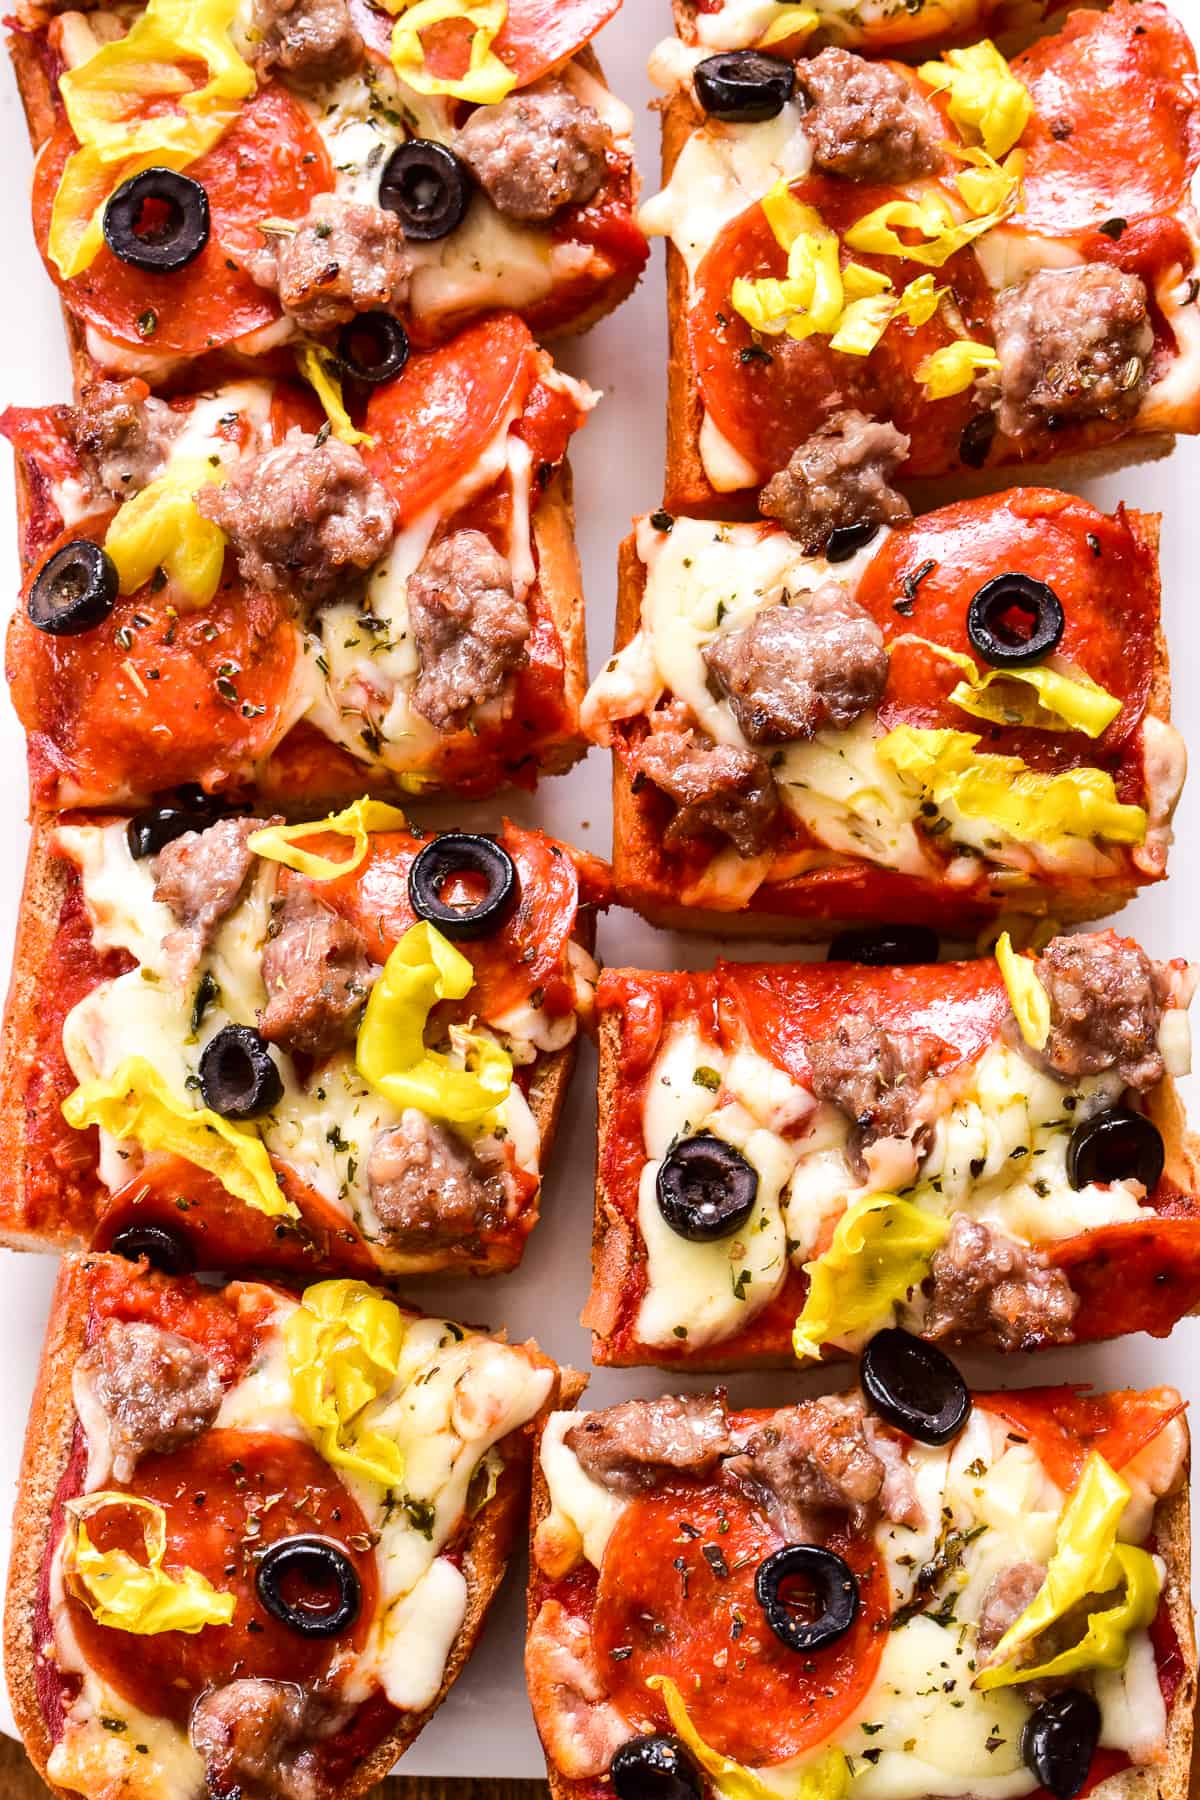 Overhead image of 8 pieces of French Bread Pizza topped with sausage, pepperoni, black olives, and pepperoncini peppers